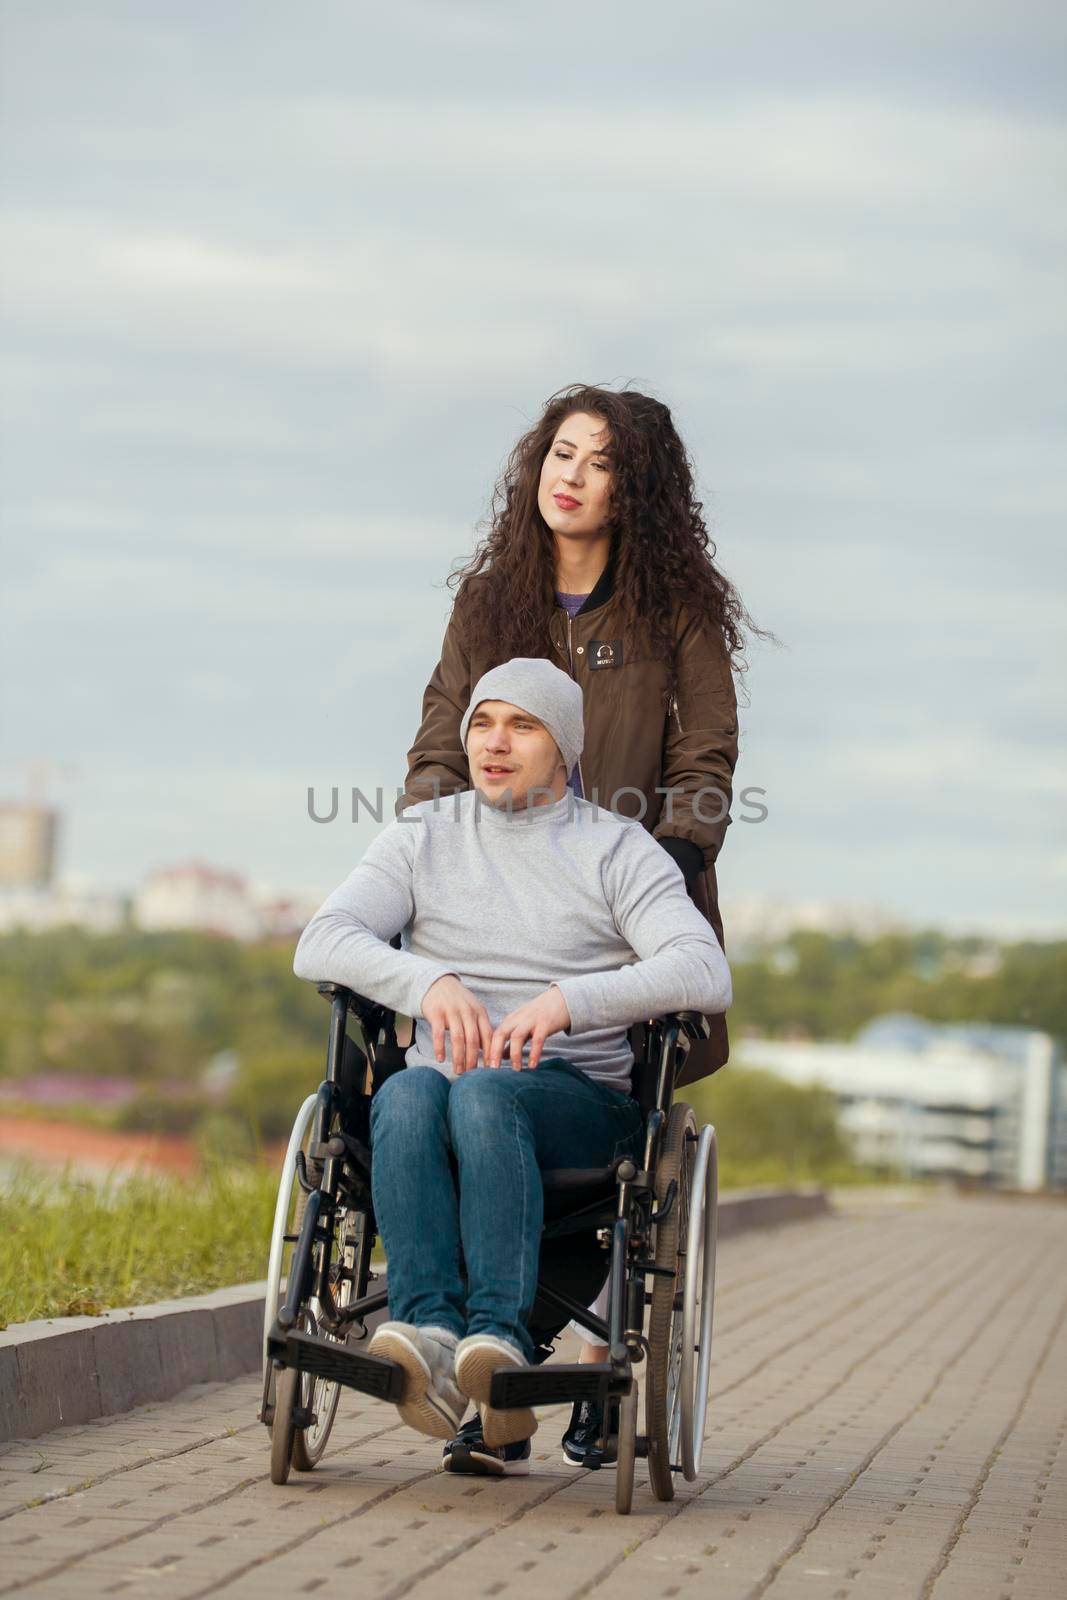 Disabled man in a wheelchair with young woman walking at the city street, close up